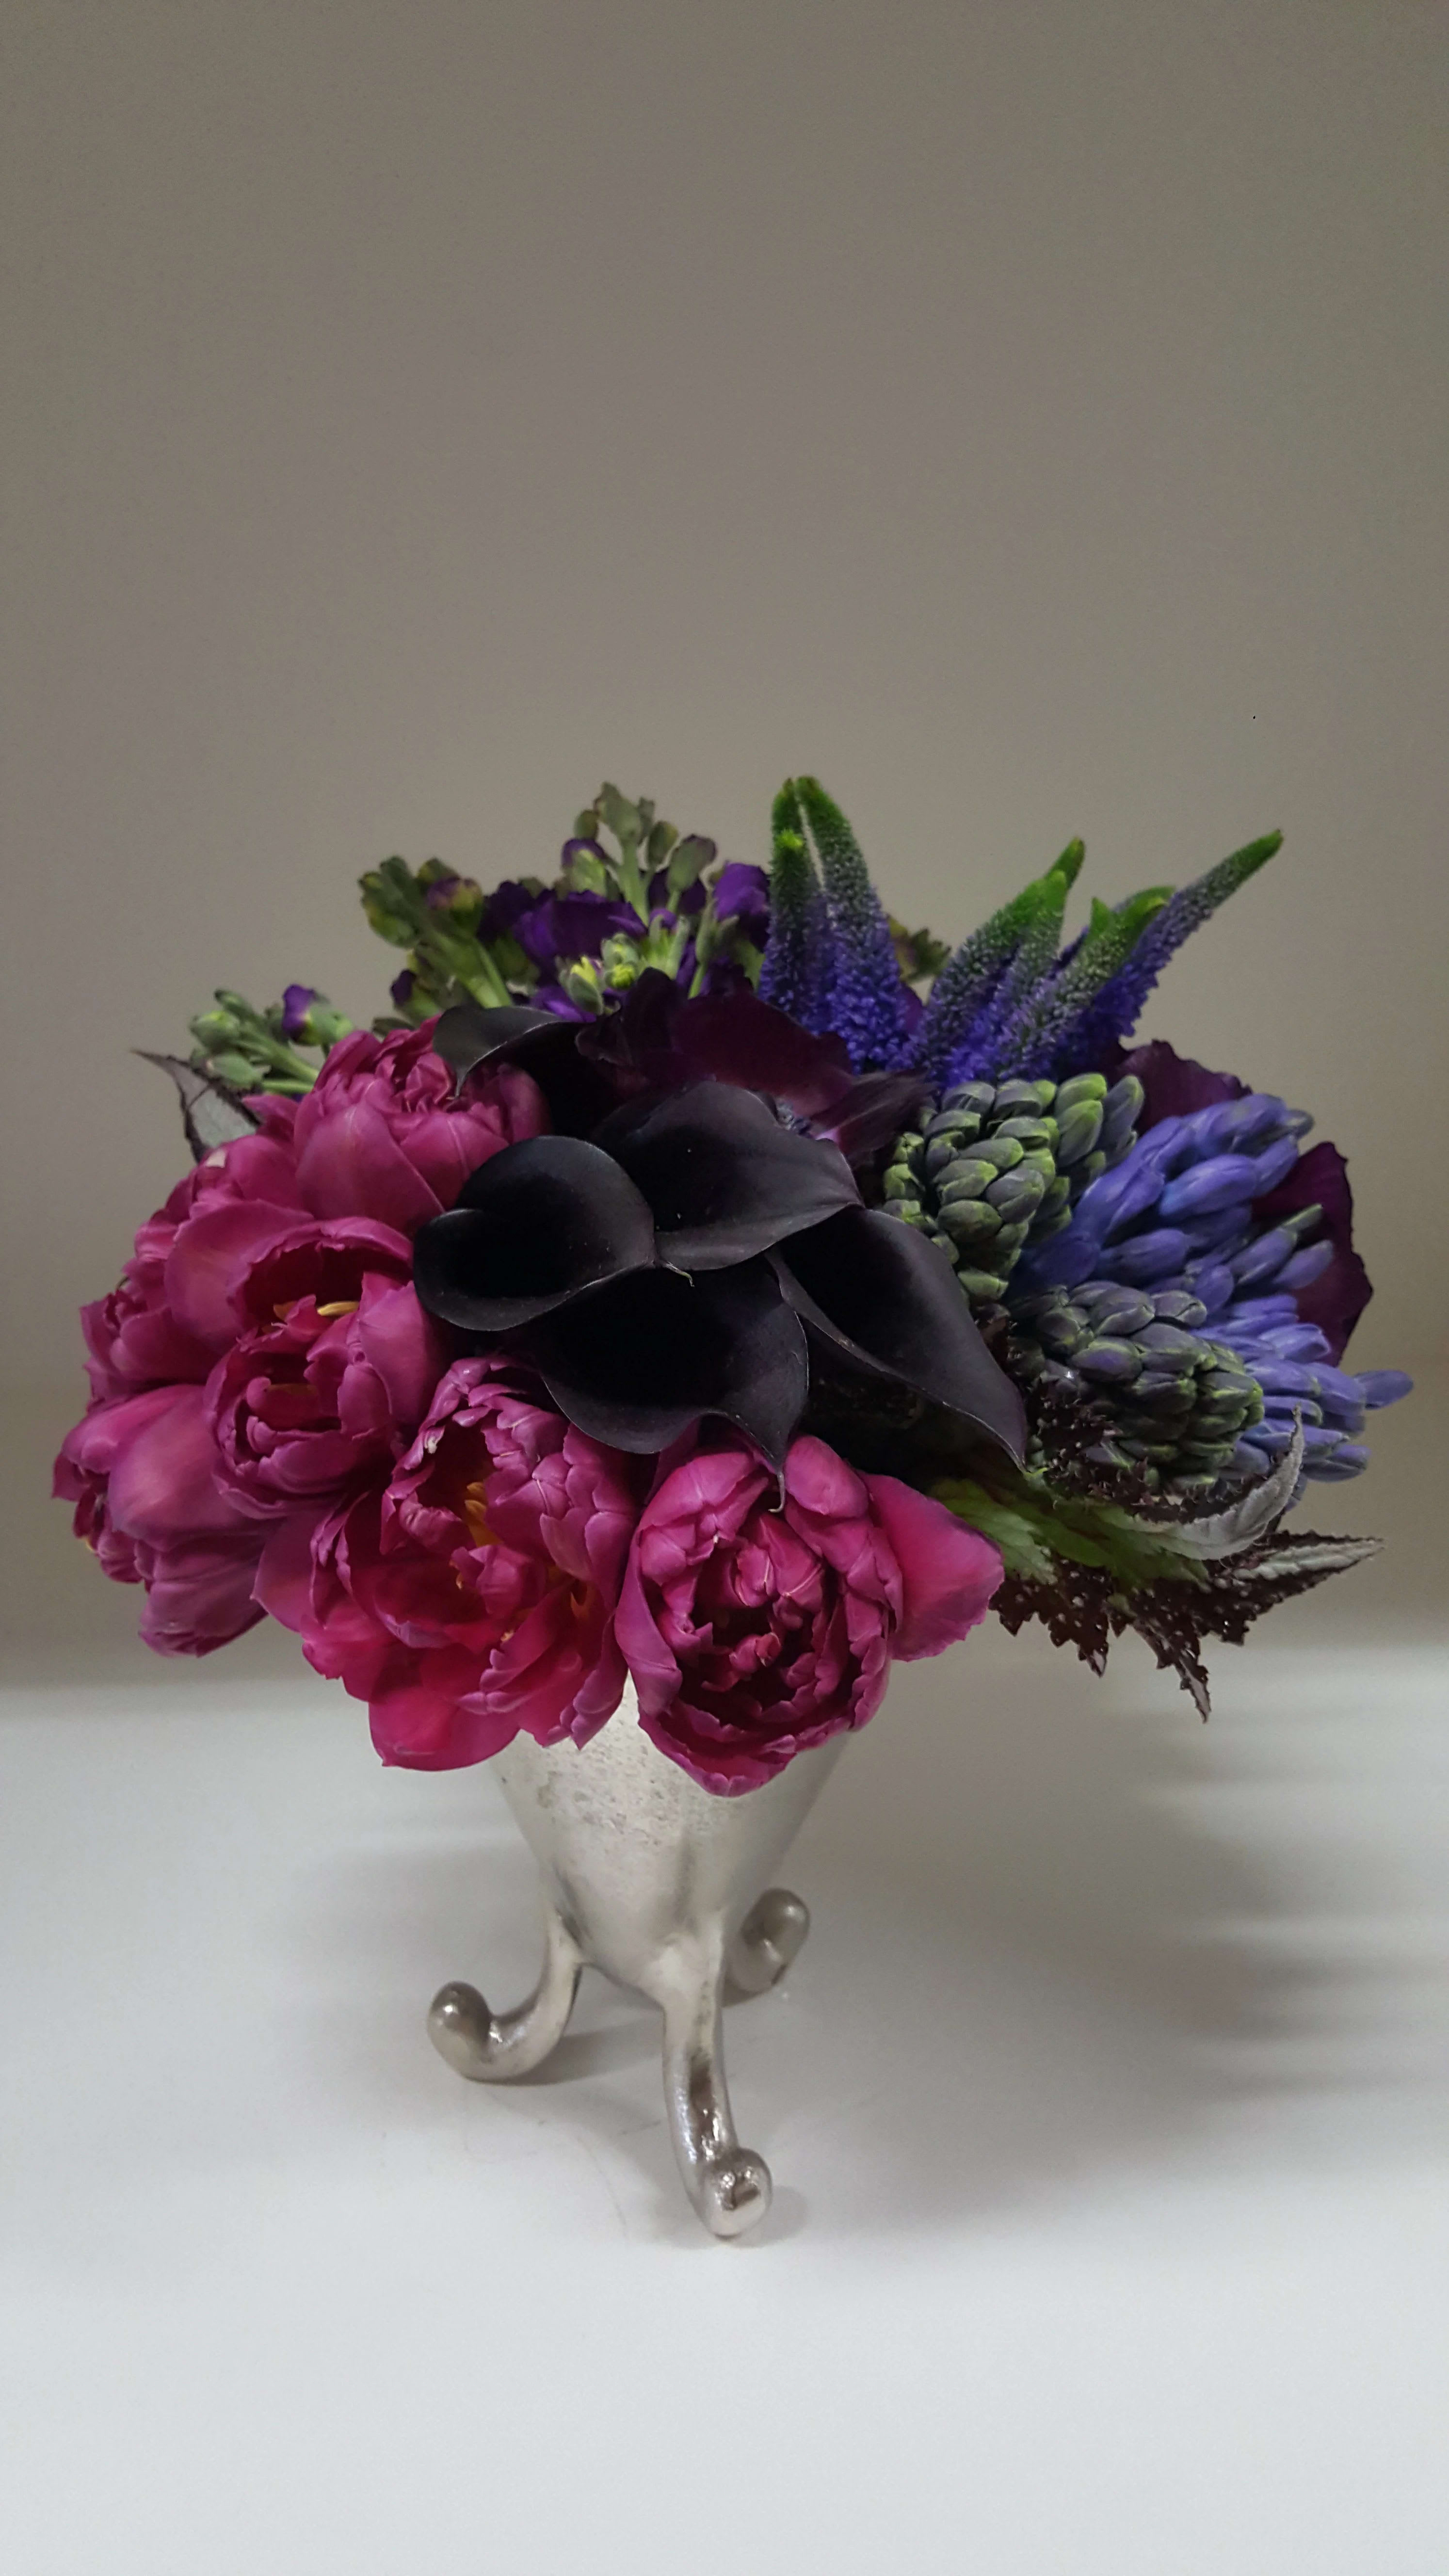 Jewel Cabachon - A jewel tone mix of premium florals and placed in a modern metal vessel.